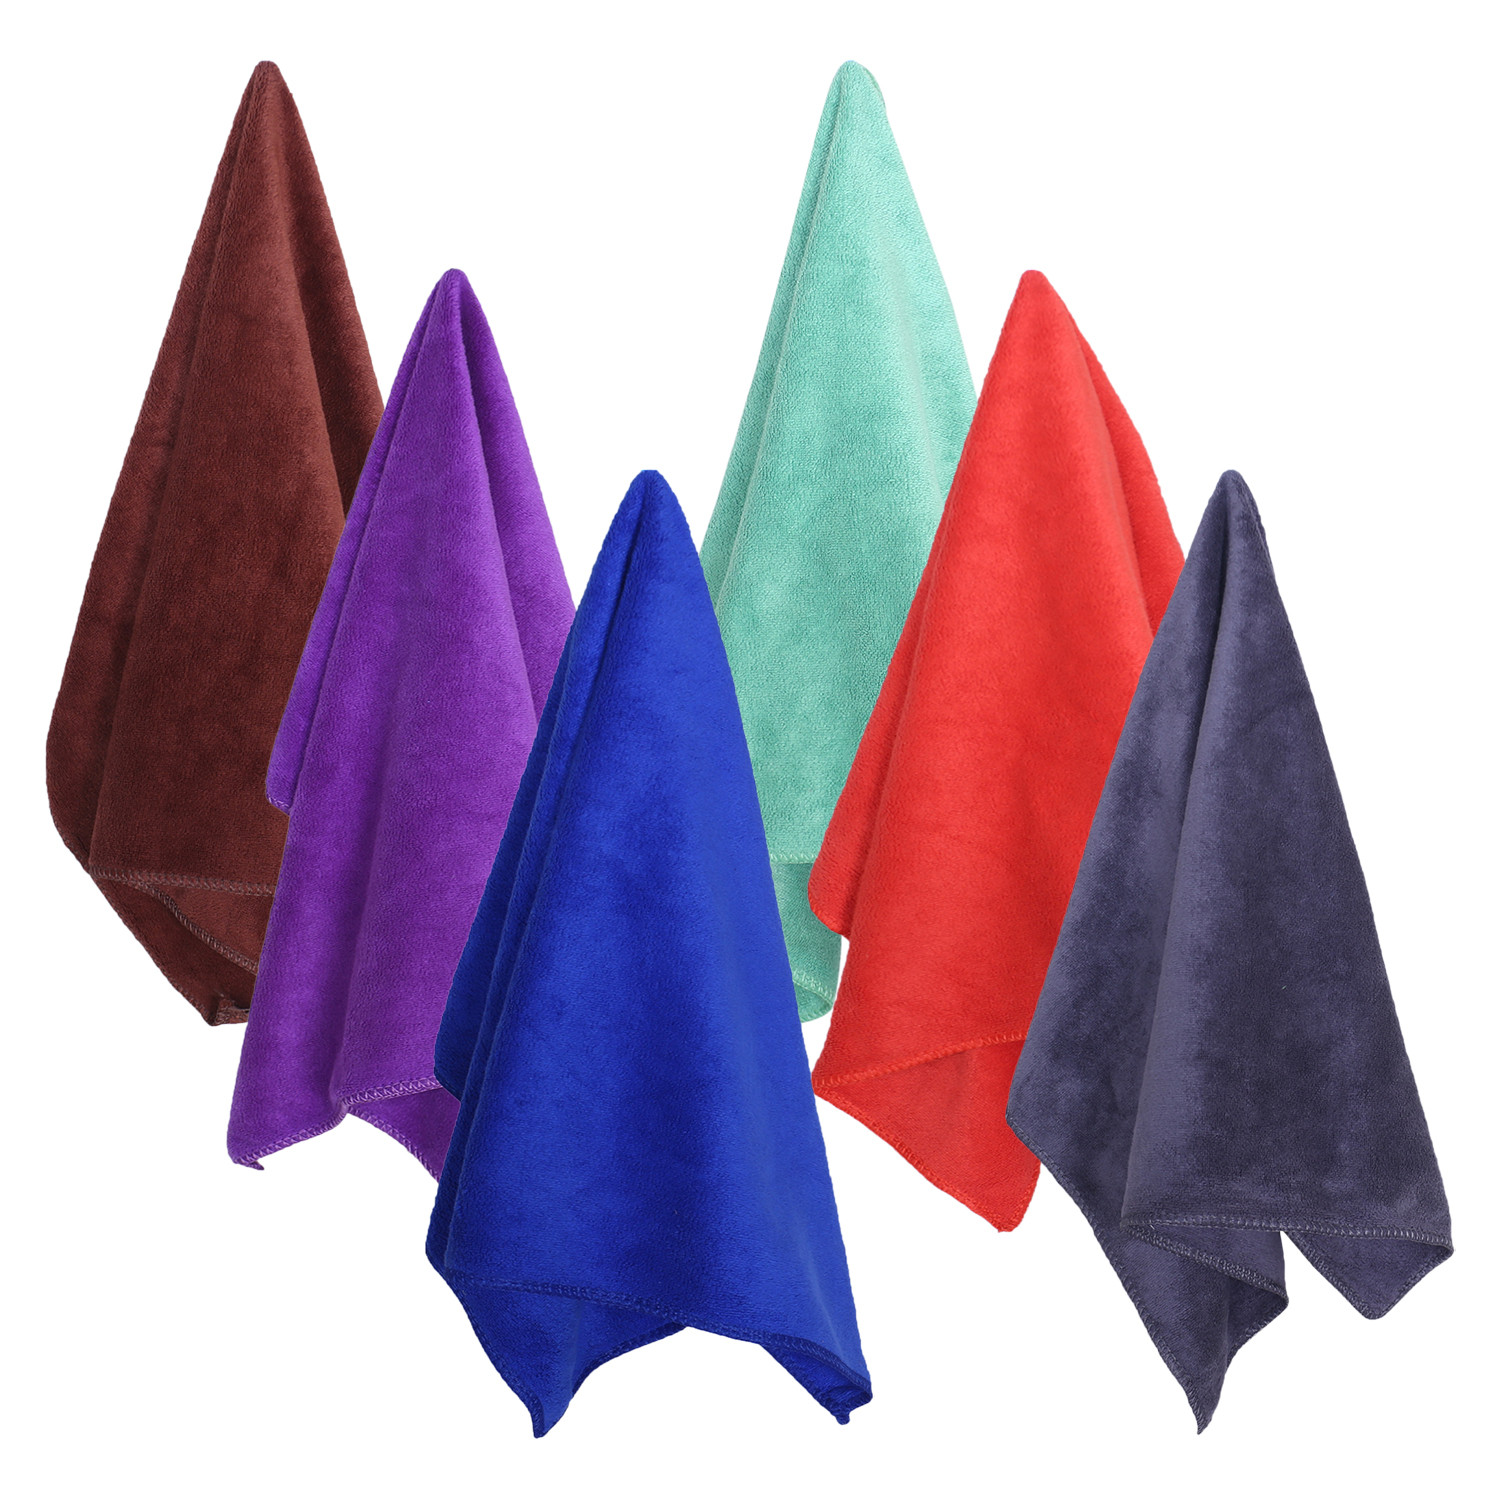 Kuber Industries Cleaning Cloths|Microfiber Highly Absorbent Wash Towels for Kitchen,Car,Window,24 x 16 Inch,Pack of 6 (Multicolor)